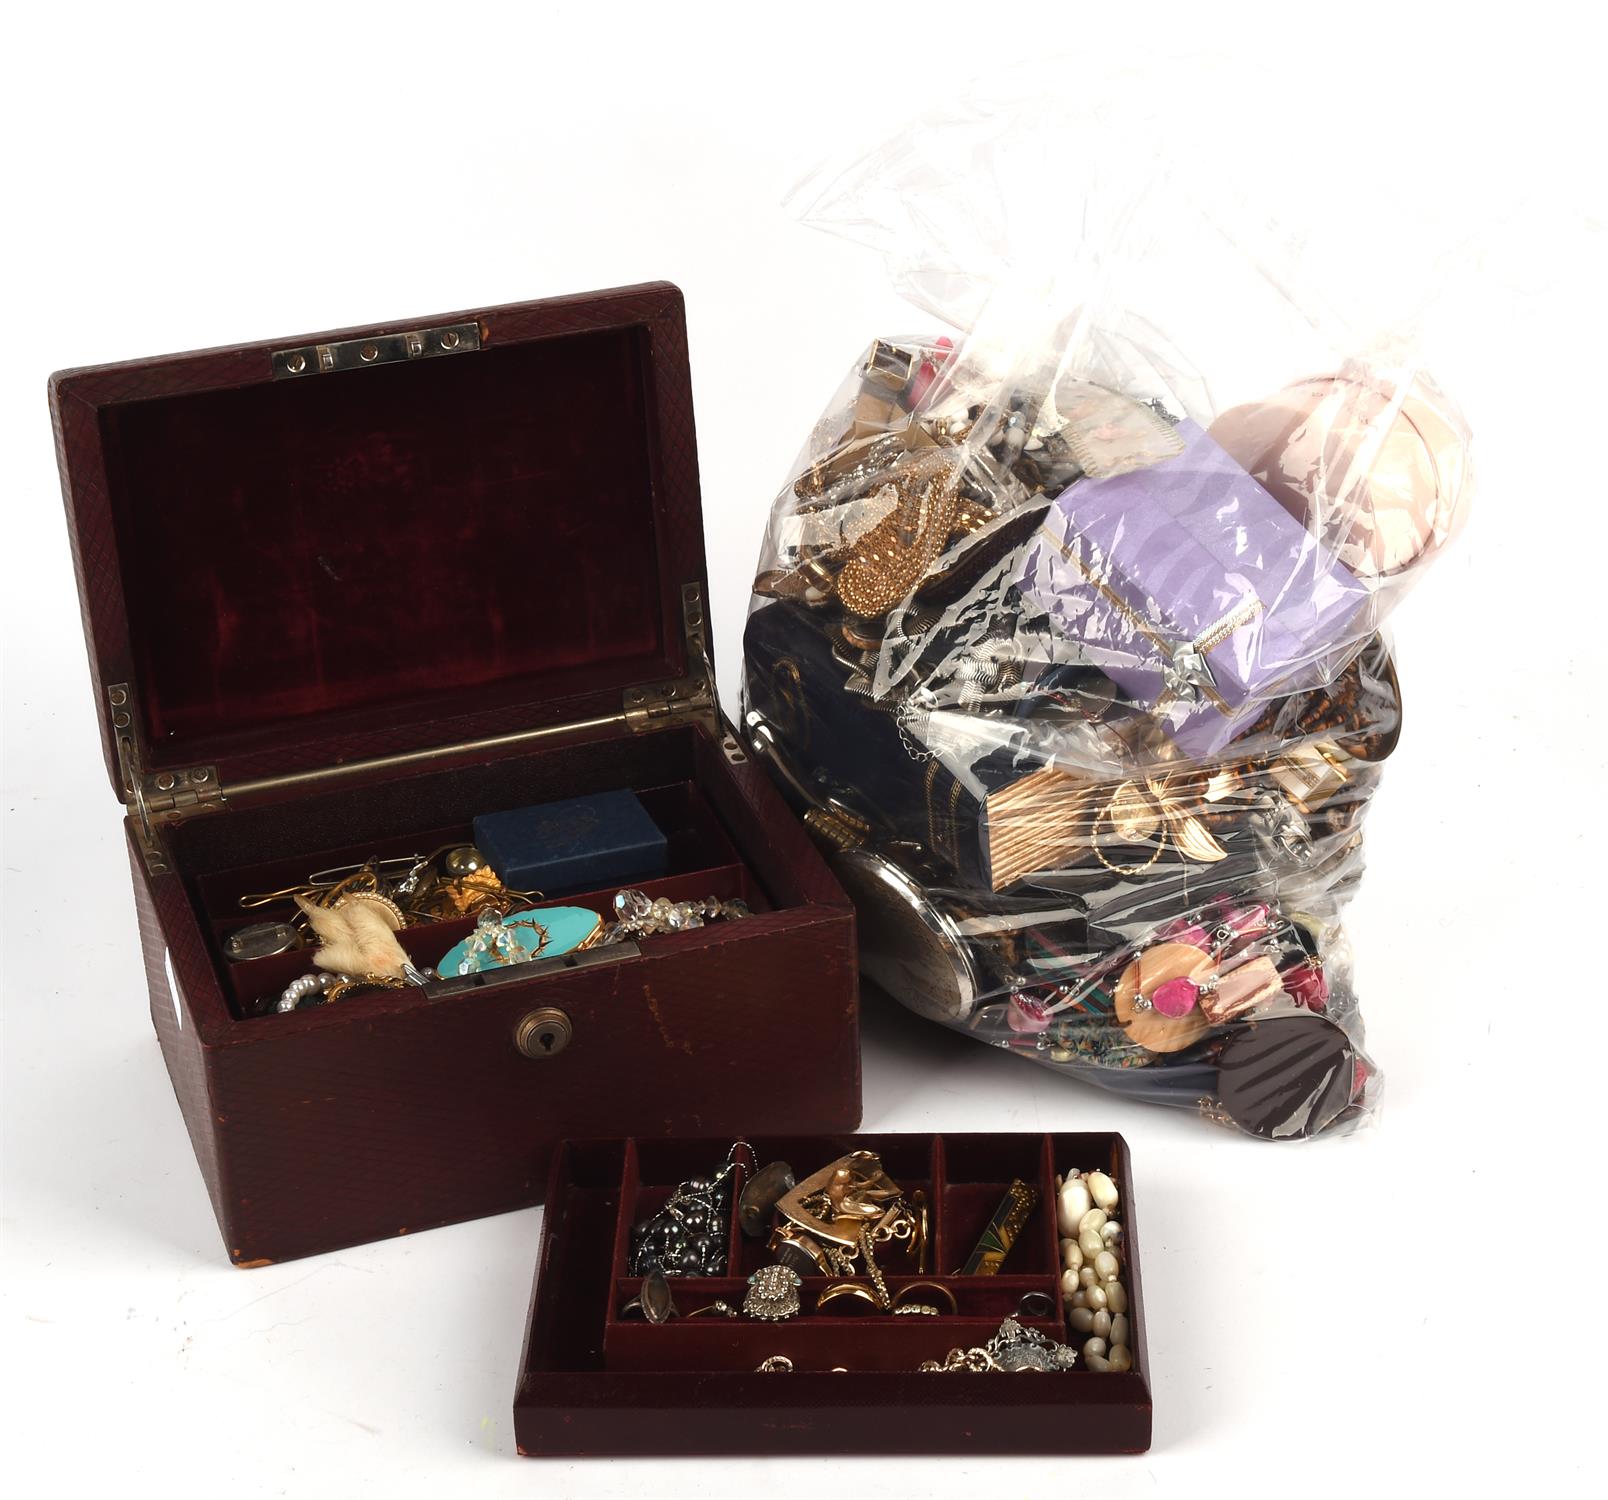 Large quantity of costume jewellery, including rings, costume watches, a compact, bead necklaces.